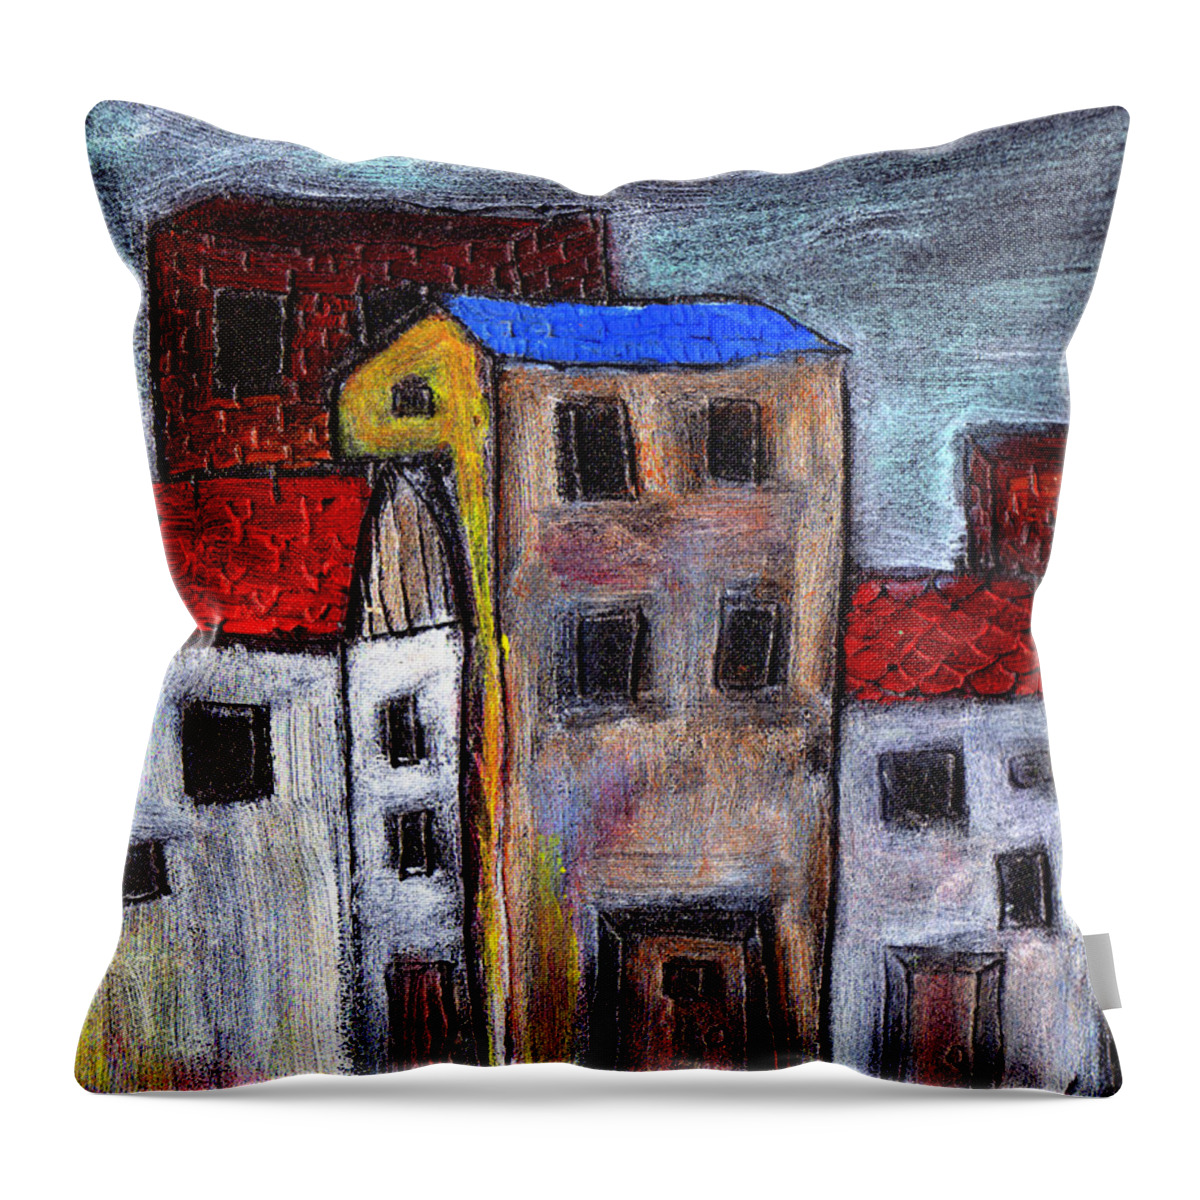 City Scene Throw Pillow featuring the painting Alley Doors by Wayne Potrafka